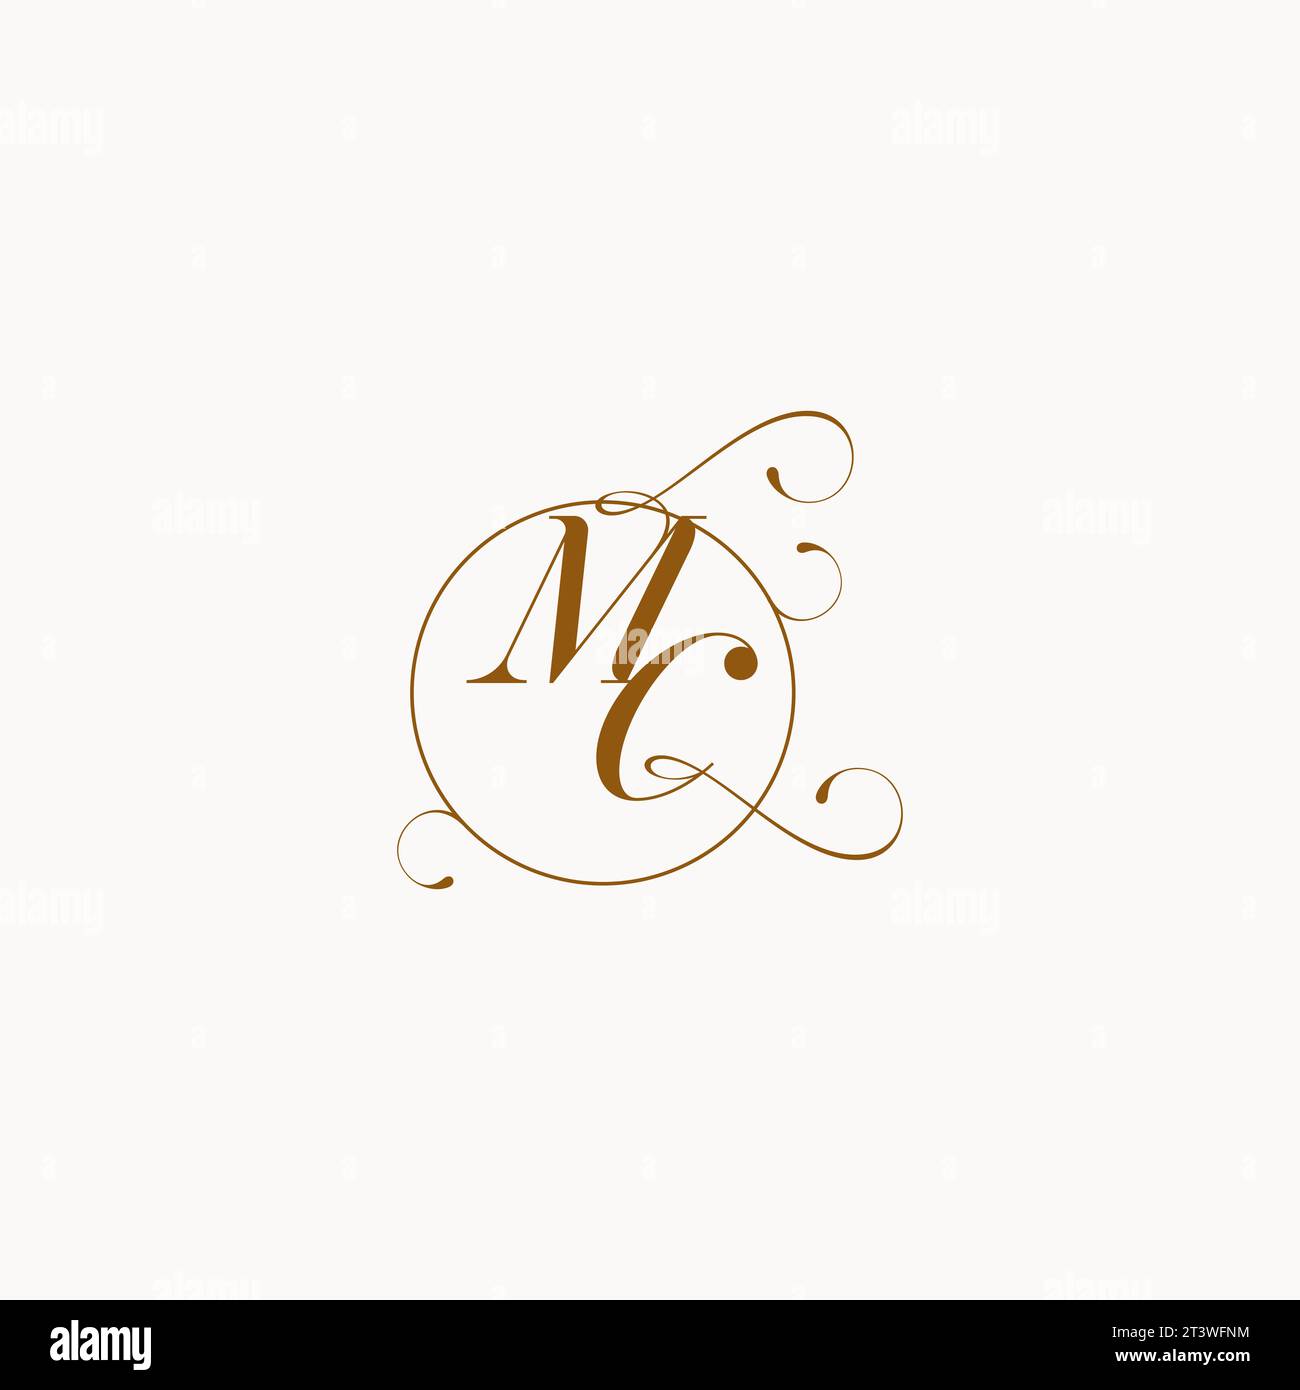 MC uniquely wedding logo symbol of your marriage and you can use it on your wedding stationary Stock Vector